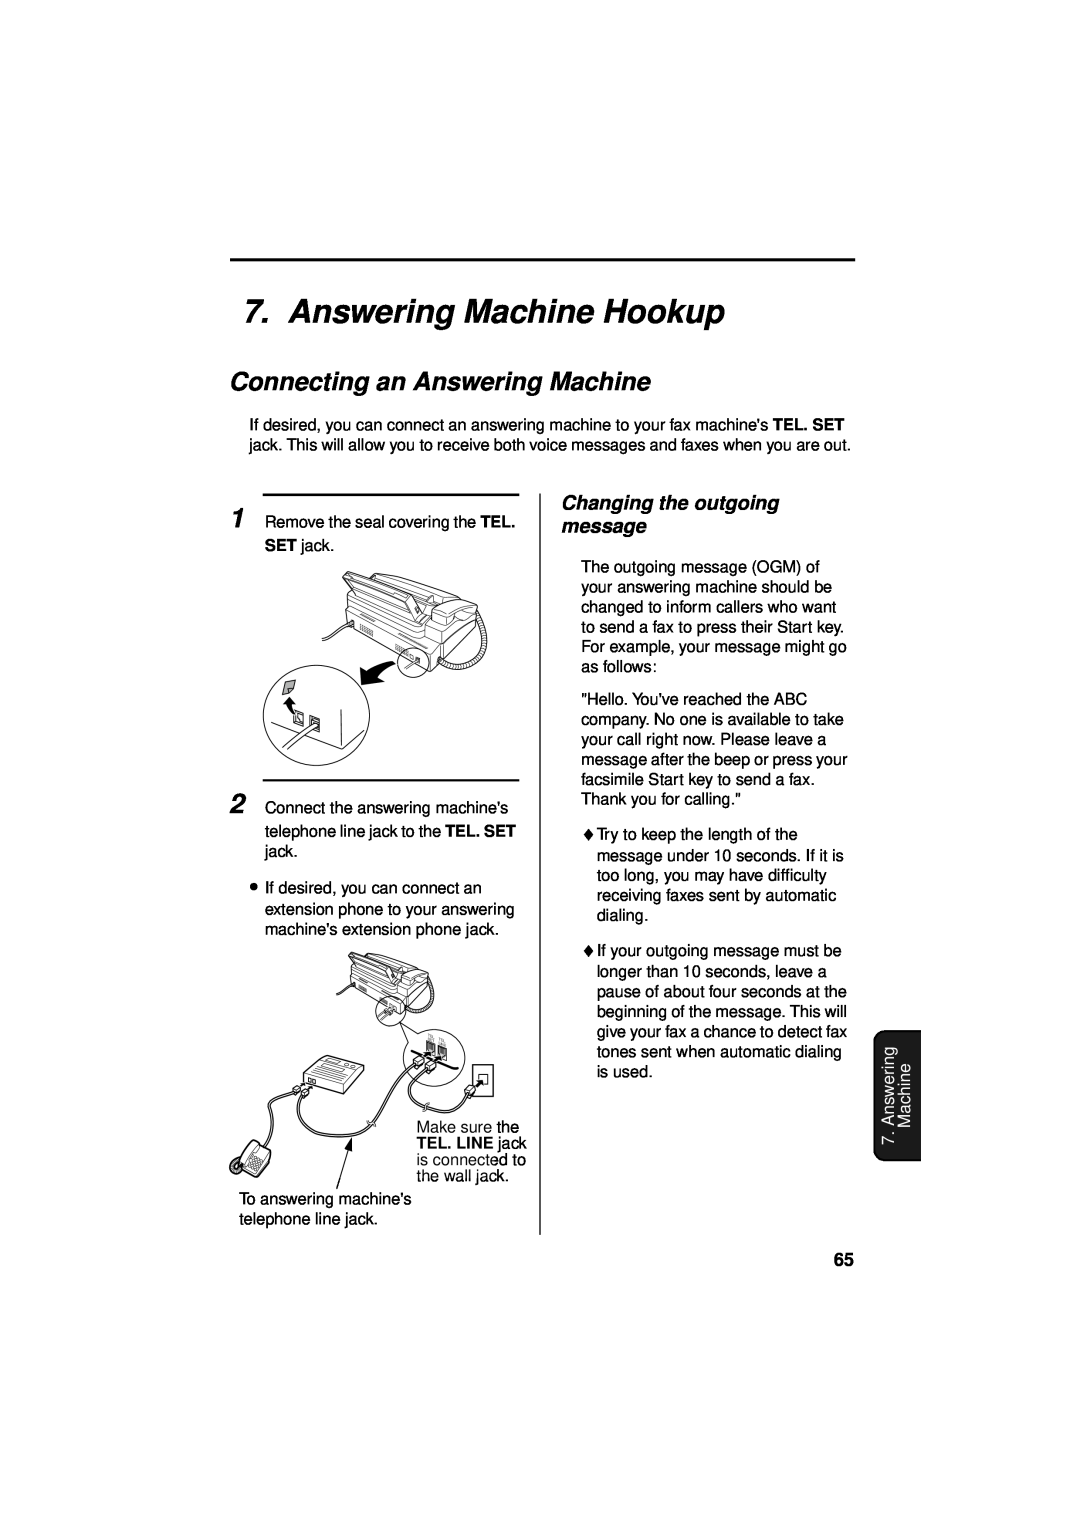 Sharp UX-340LM manual Answering Machine Hookup, Connecting an Answering Machine, Changing the outgoing message 